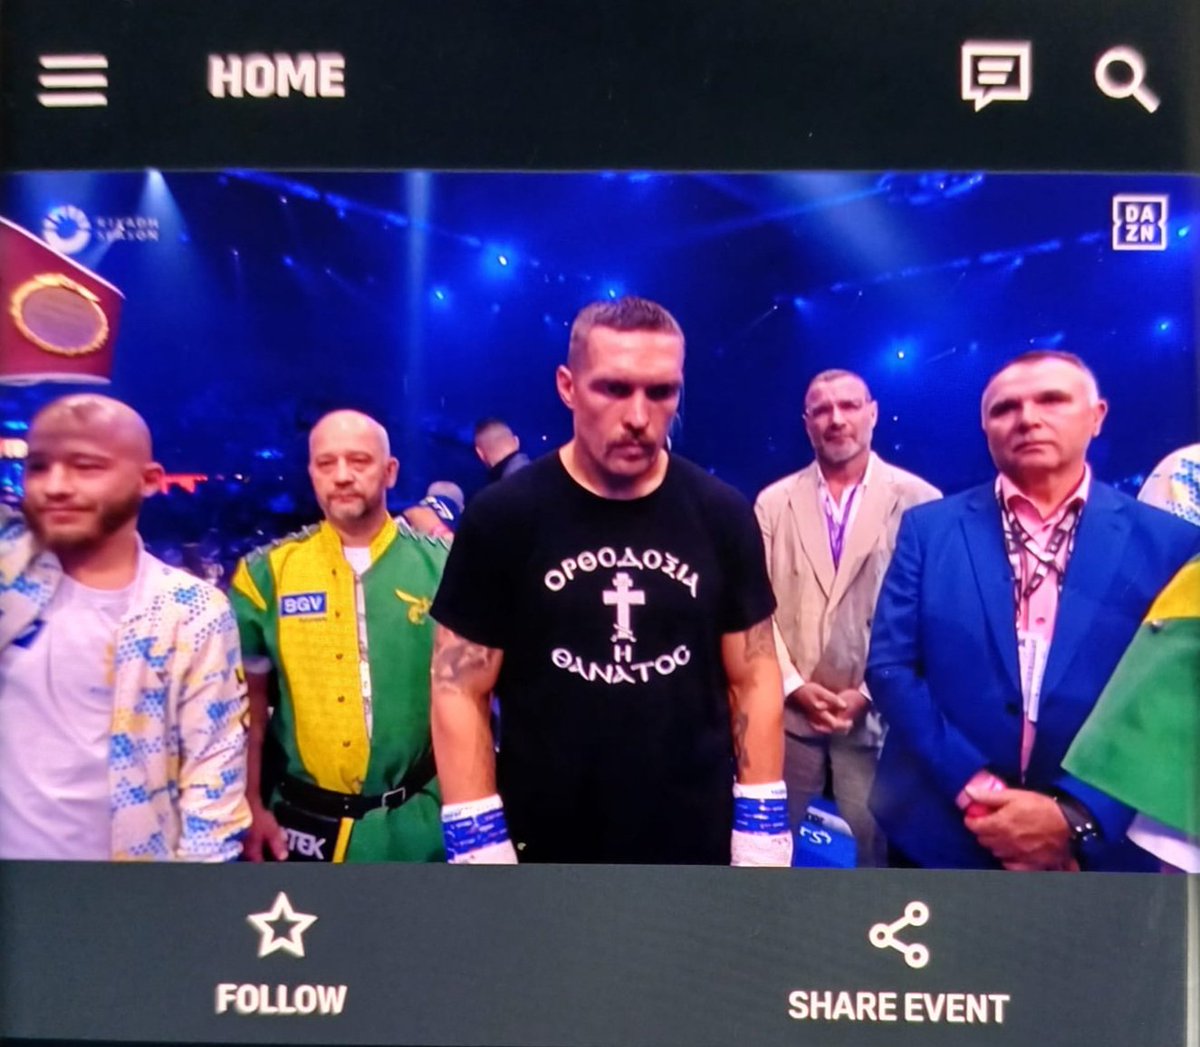 So @usykaa had a t-shirt at last night's fight in Riyadh that said: 'ΟΡΘΟΔΟΧΙΑ Η ΘΑΝΑΤΟC' Which basically means: 'ORTHODOX CHRISTIANITY OR DEATH'. Can you imagine the media reaction if a Muslim boxer had a t-shirt that said: 'ISLAM OR DEATH'? I assume this is Usyk's way of